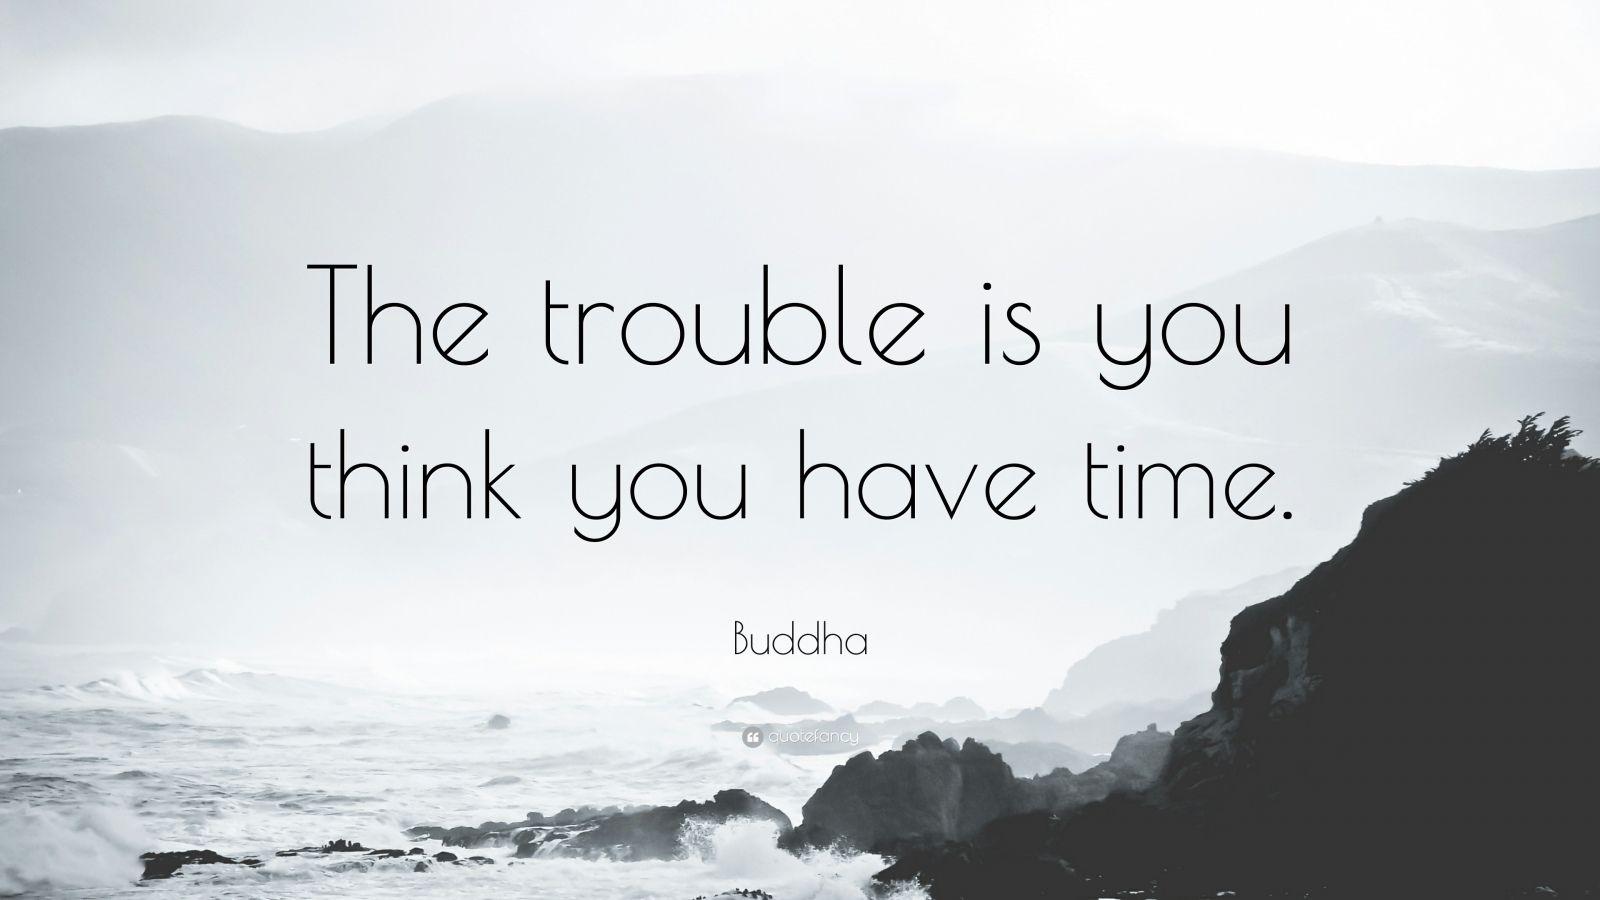 Buddha Quote: “The trouble is you think you have time.” 29